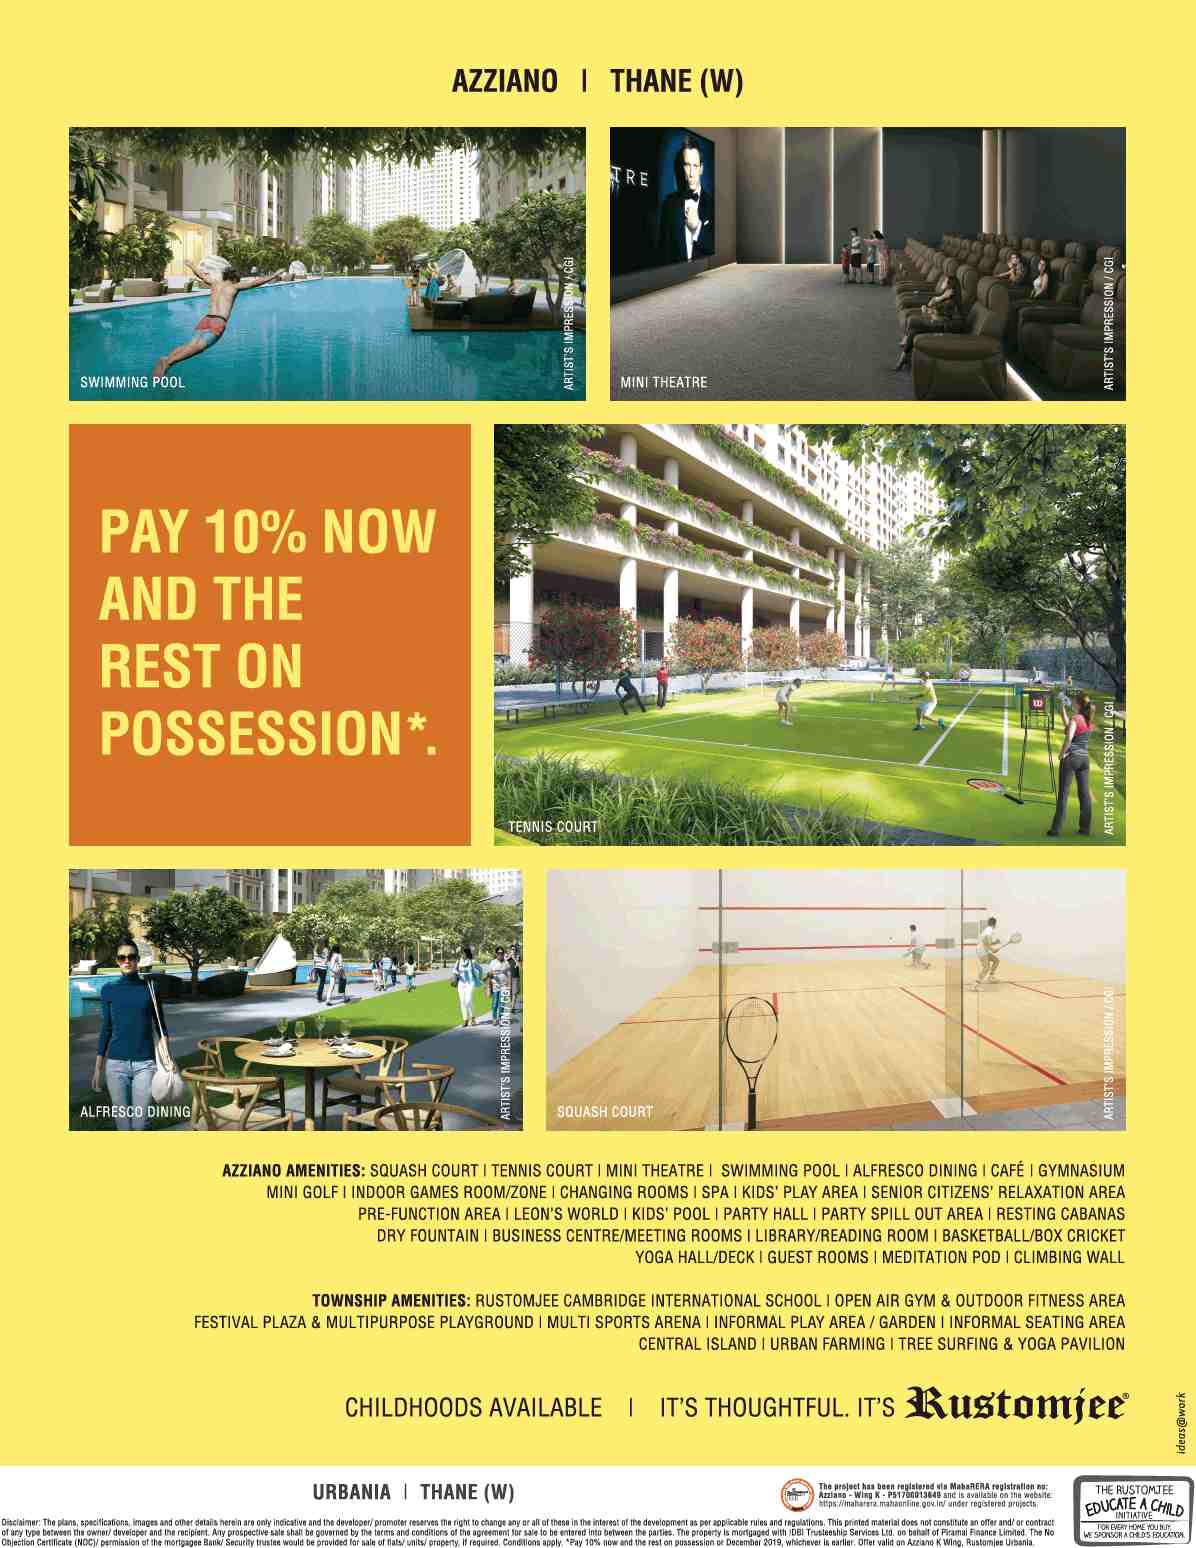 Pay 10% and the rest on possession Rustomjee Azziano in Mumbai